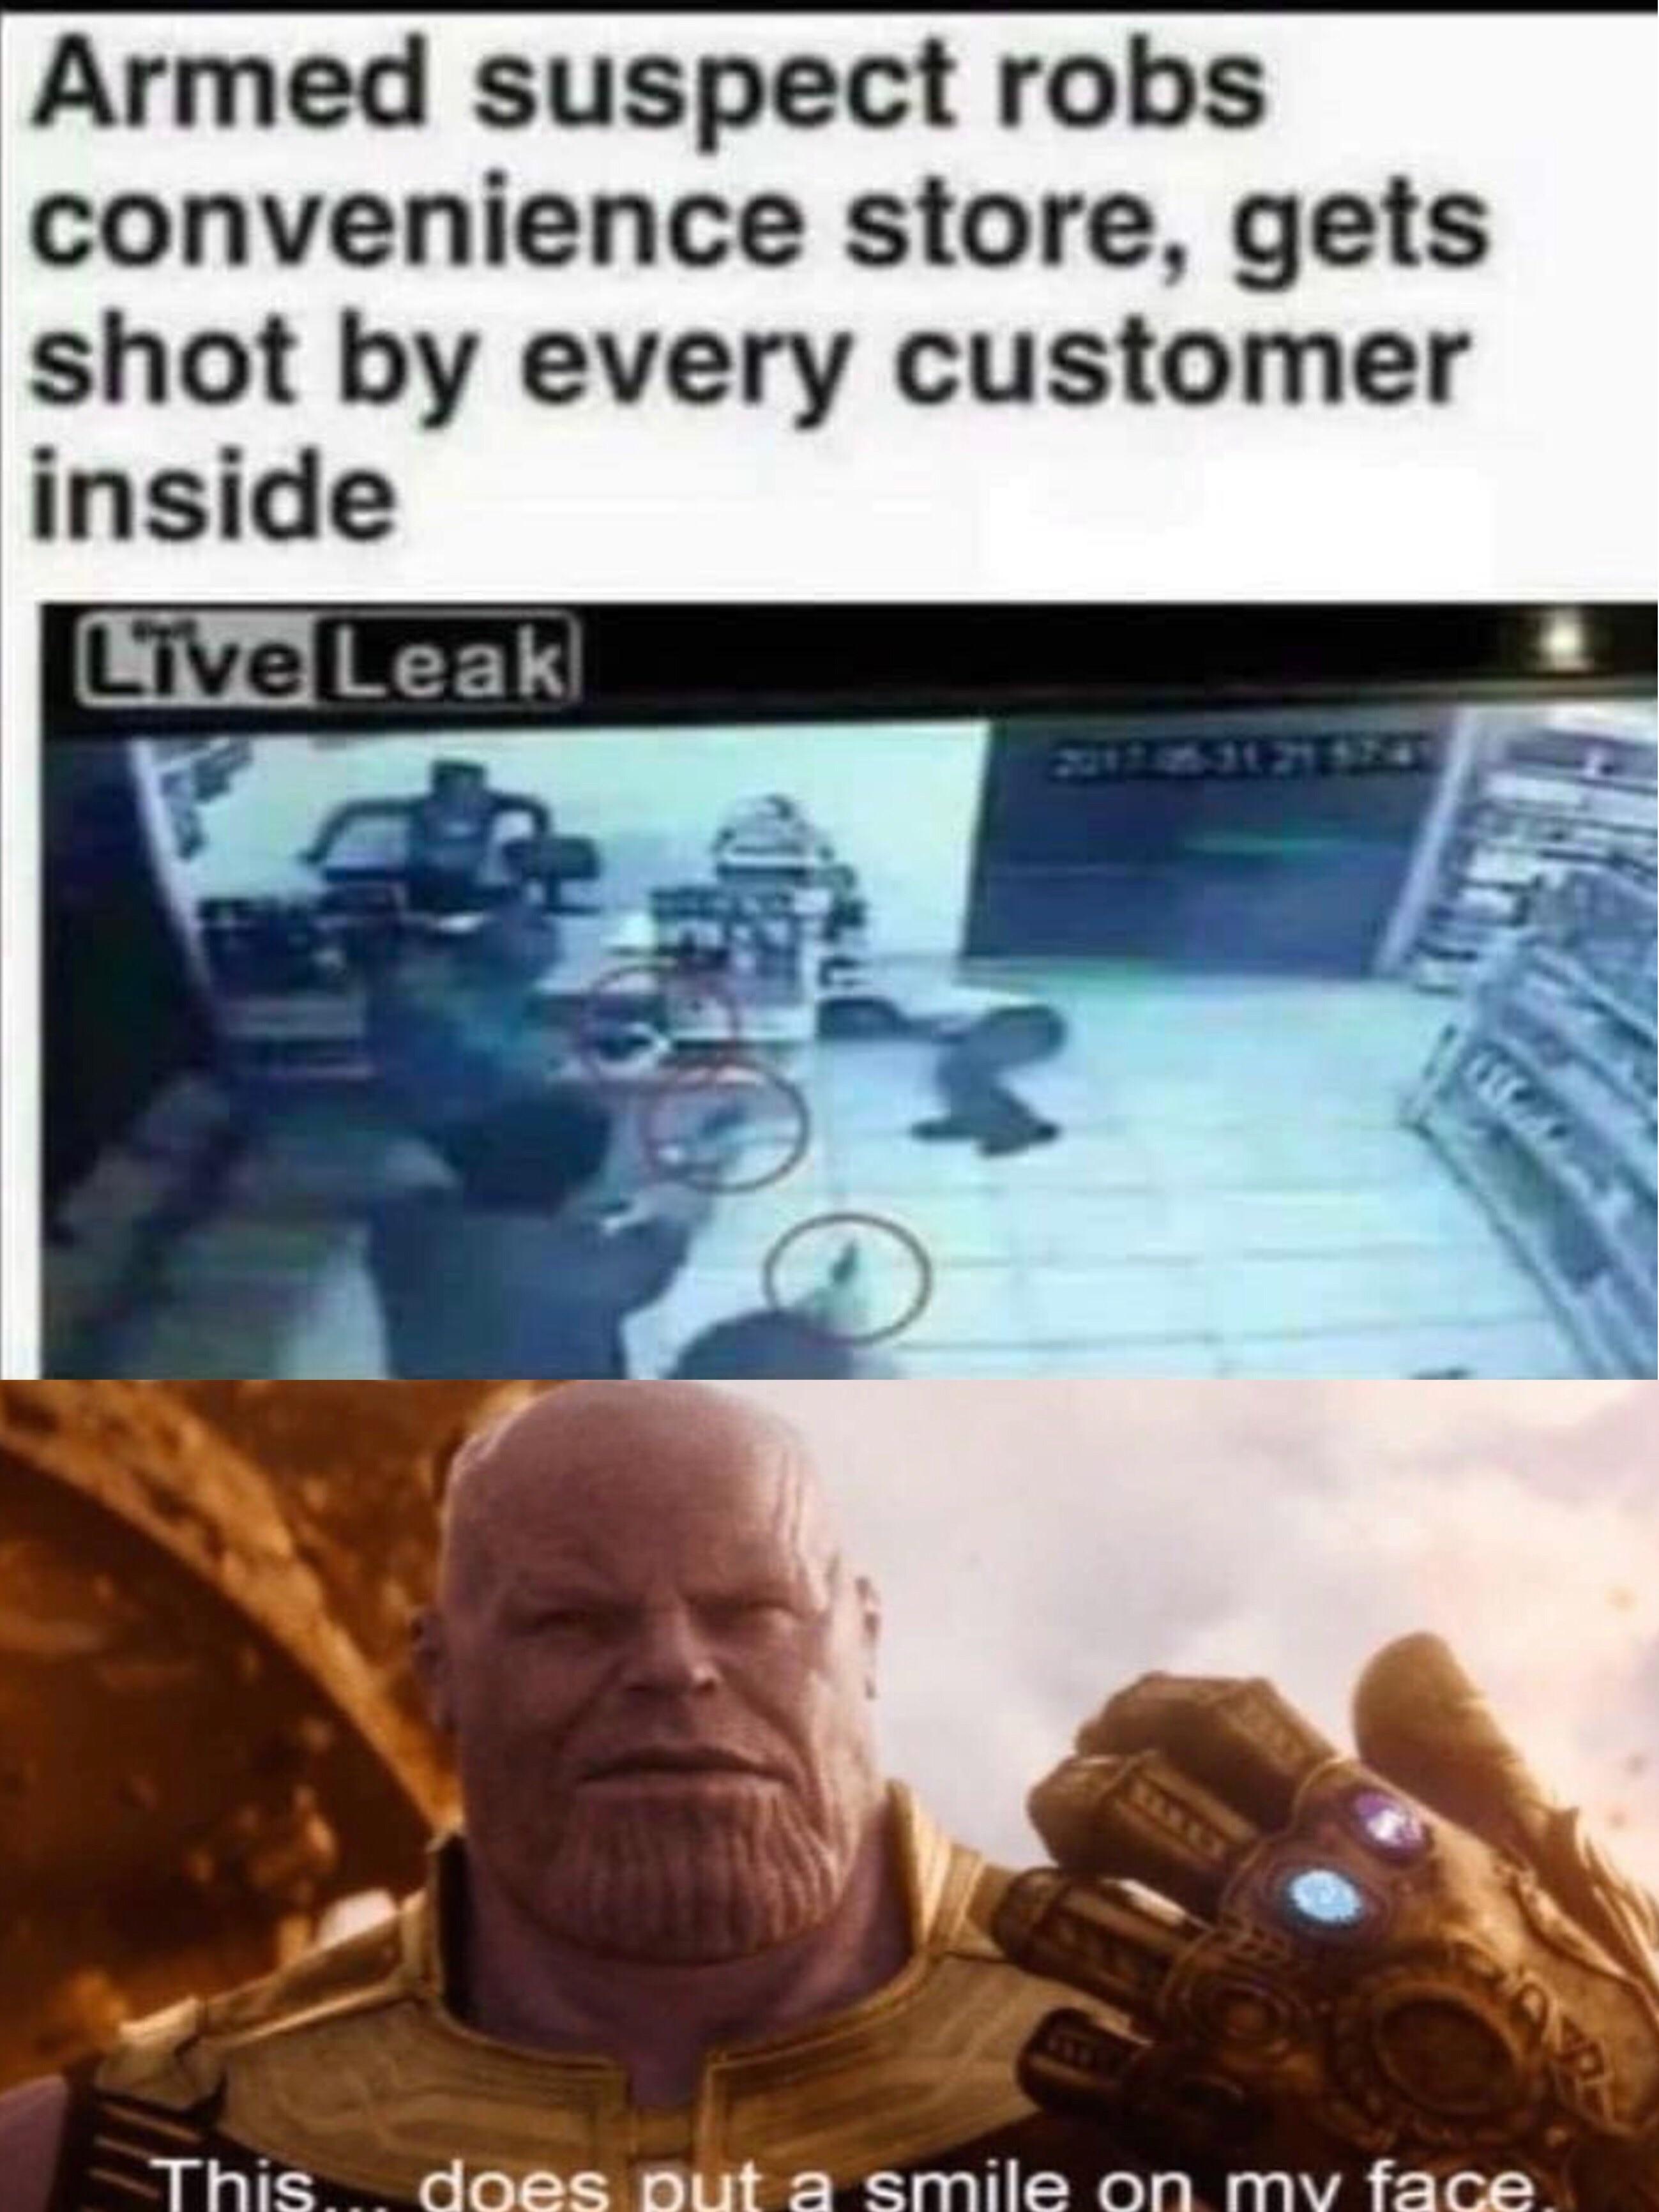 Avengers Endgame memes - stopping bad guys - Armed suspect robs convenience store, gets shot by every customer inside LiveLeak This.... does put a smile on my face,